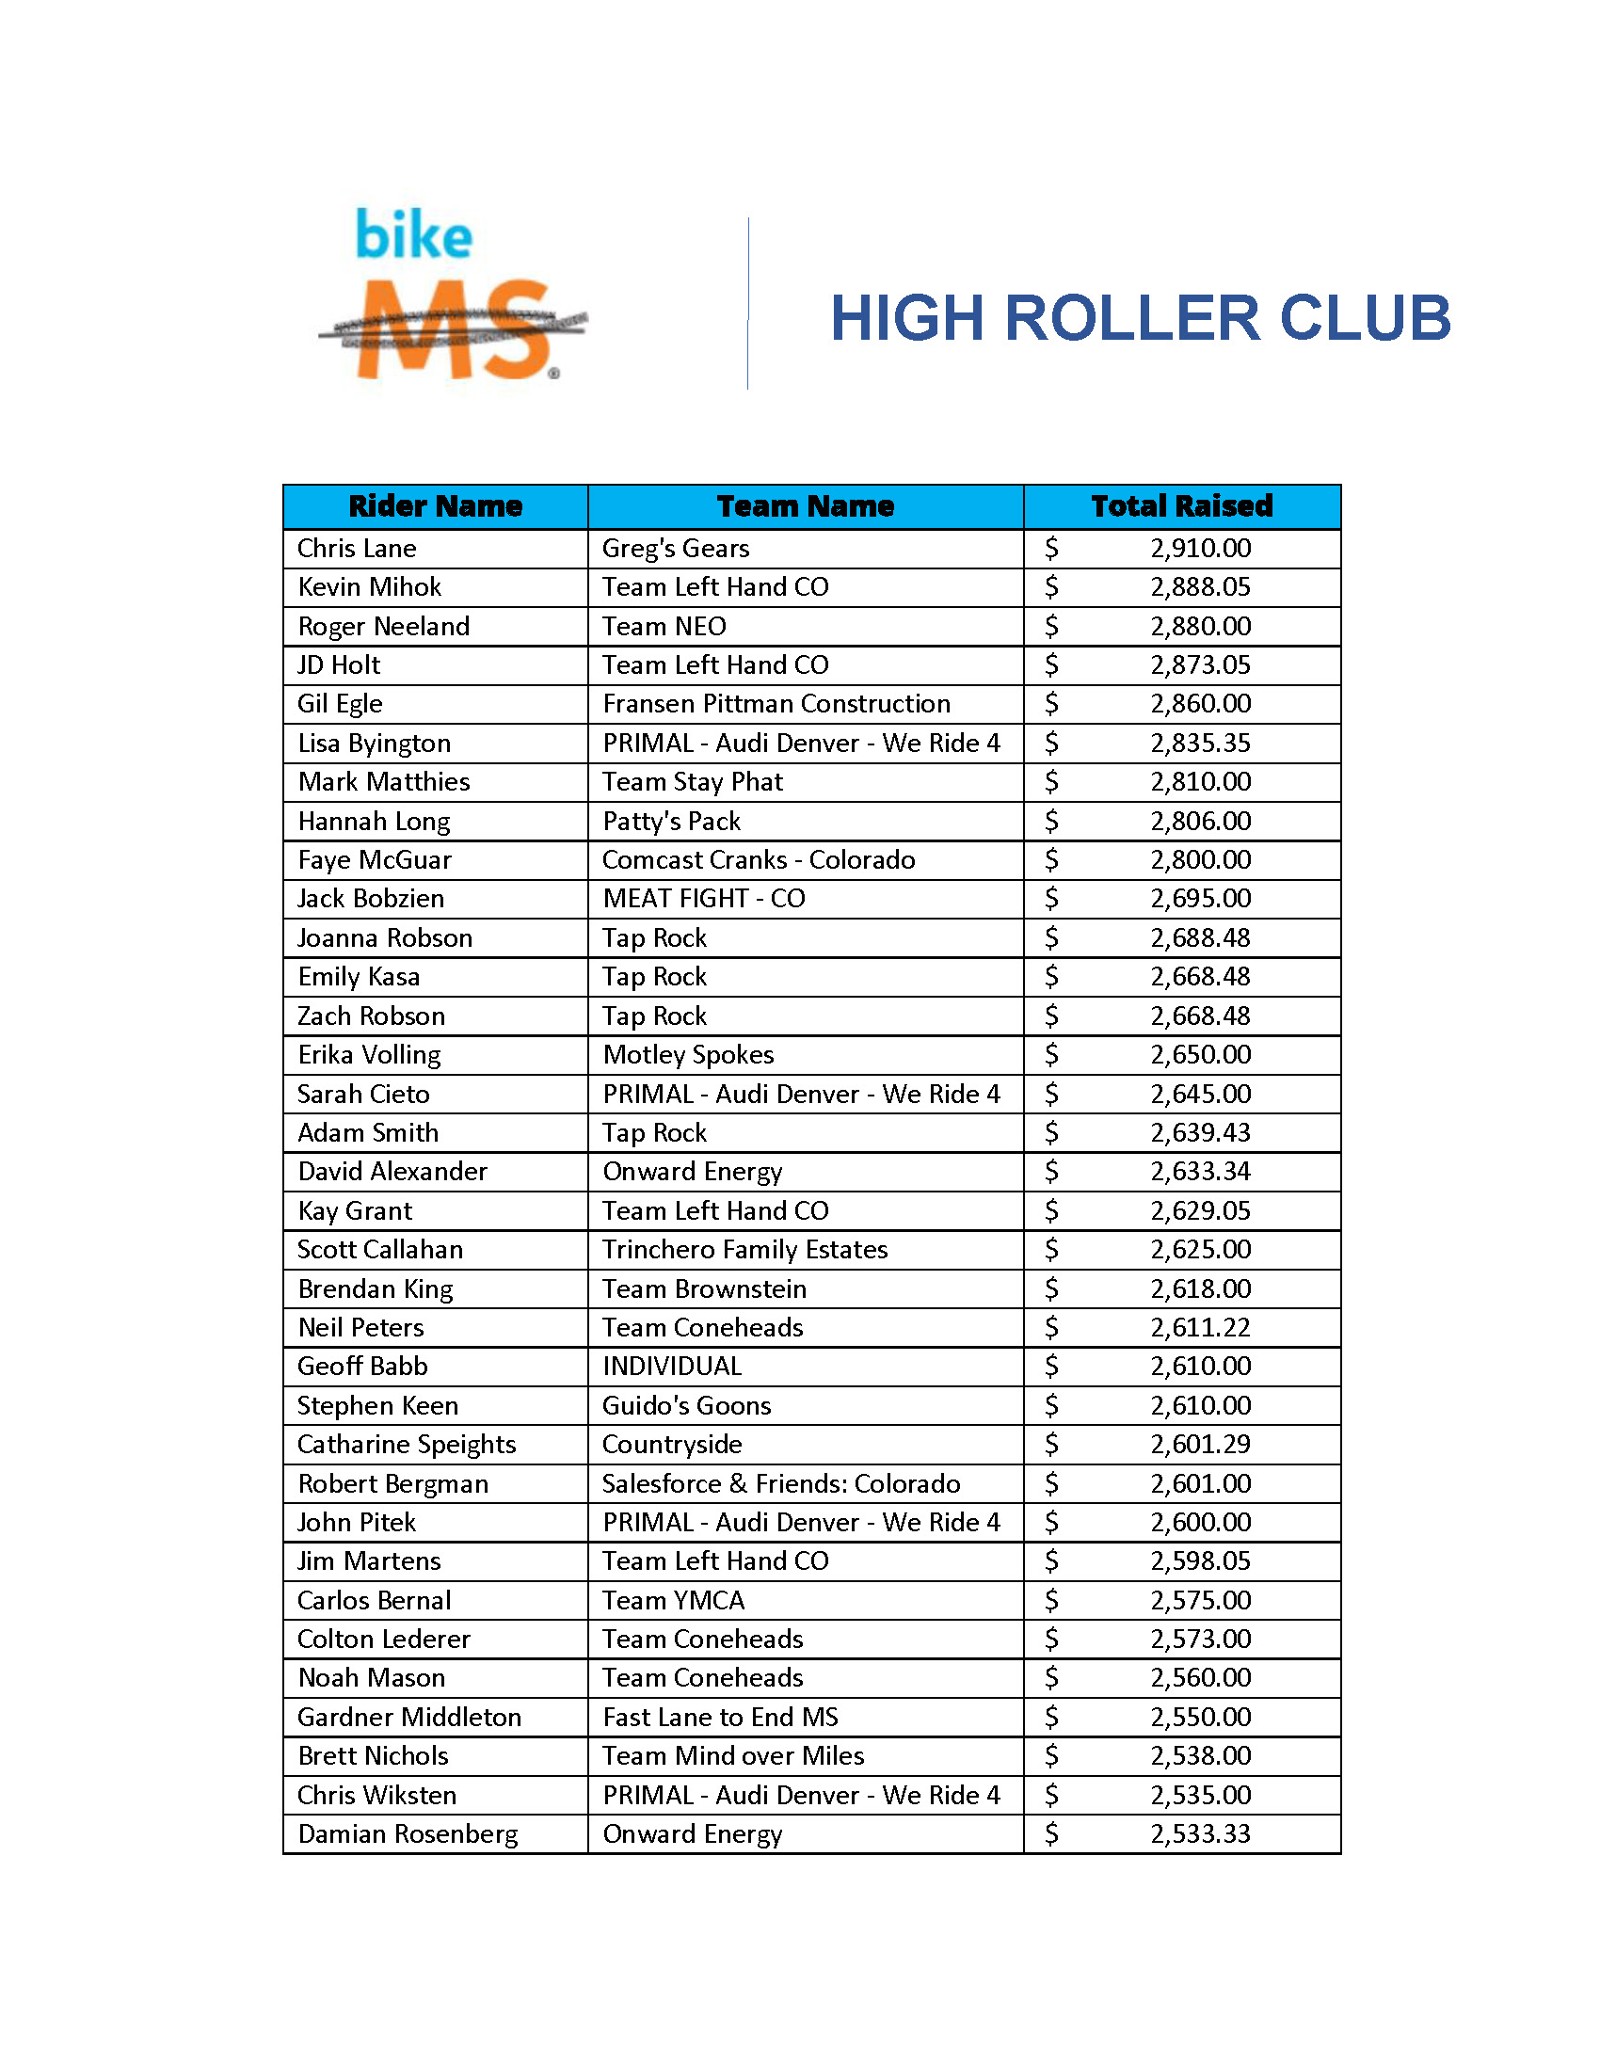 Bike MS Colorado 2023 2023 Top 150 Club! (click image to see full list)